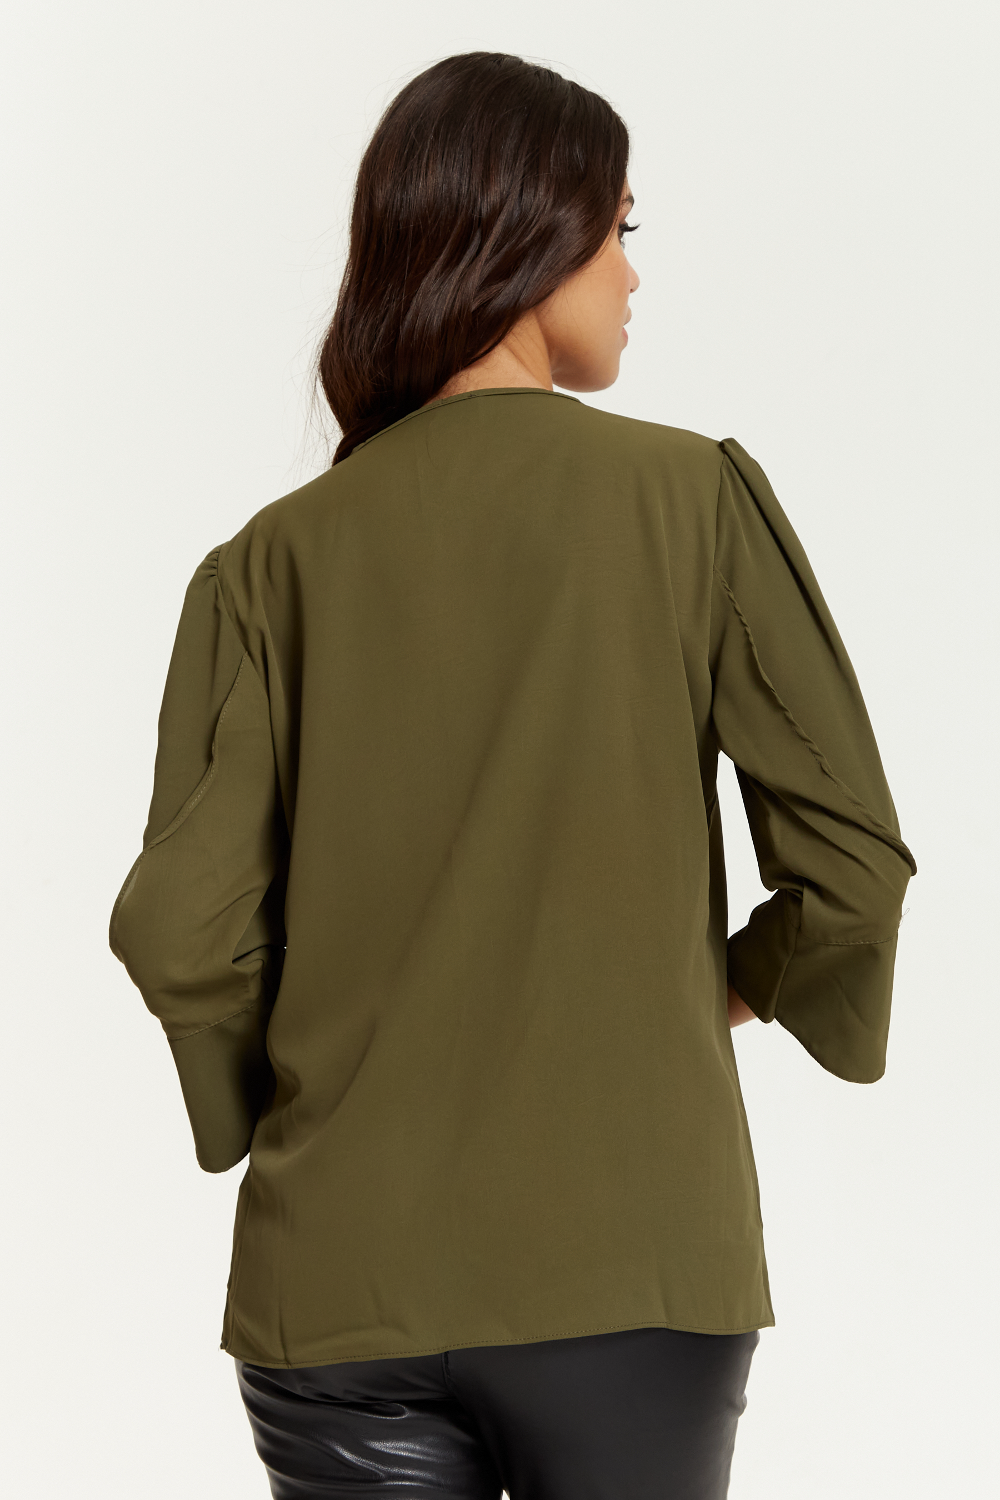 Long Sleeves Detailed Cuff Blouse with V Neck in Khaki GLR FASHION NETWORKING